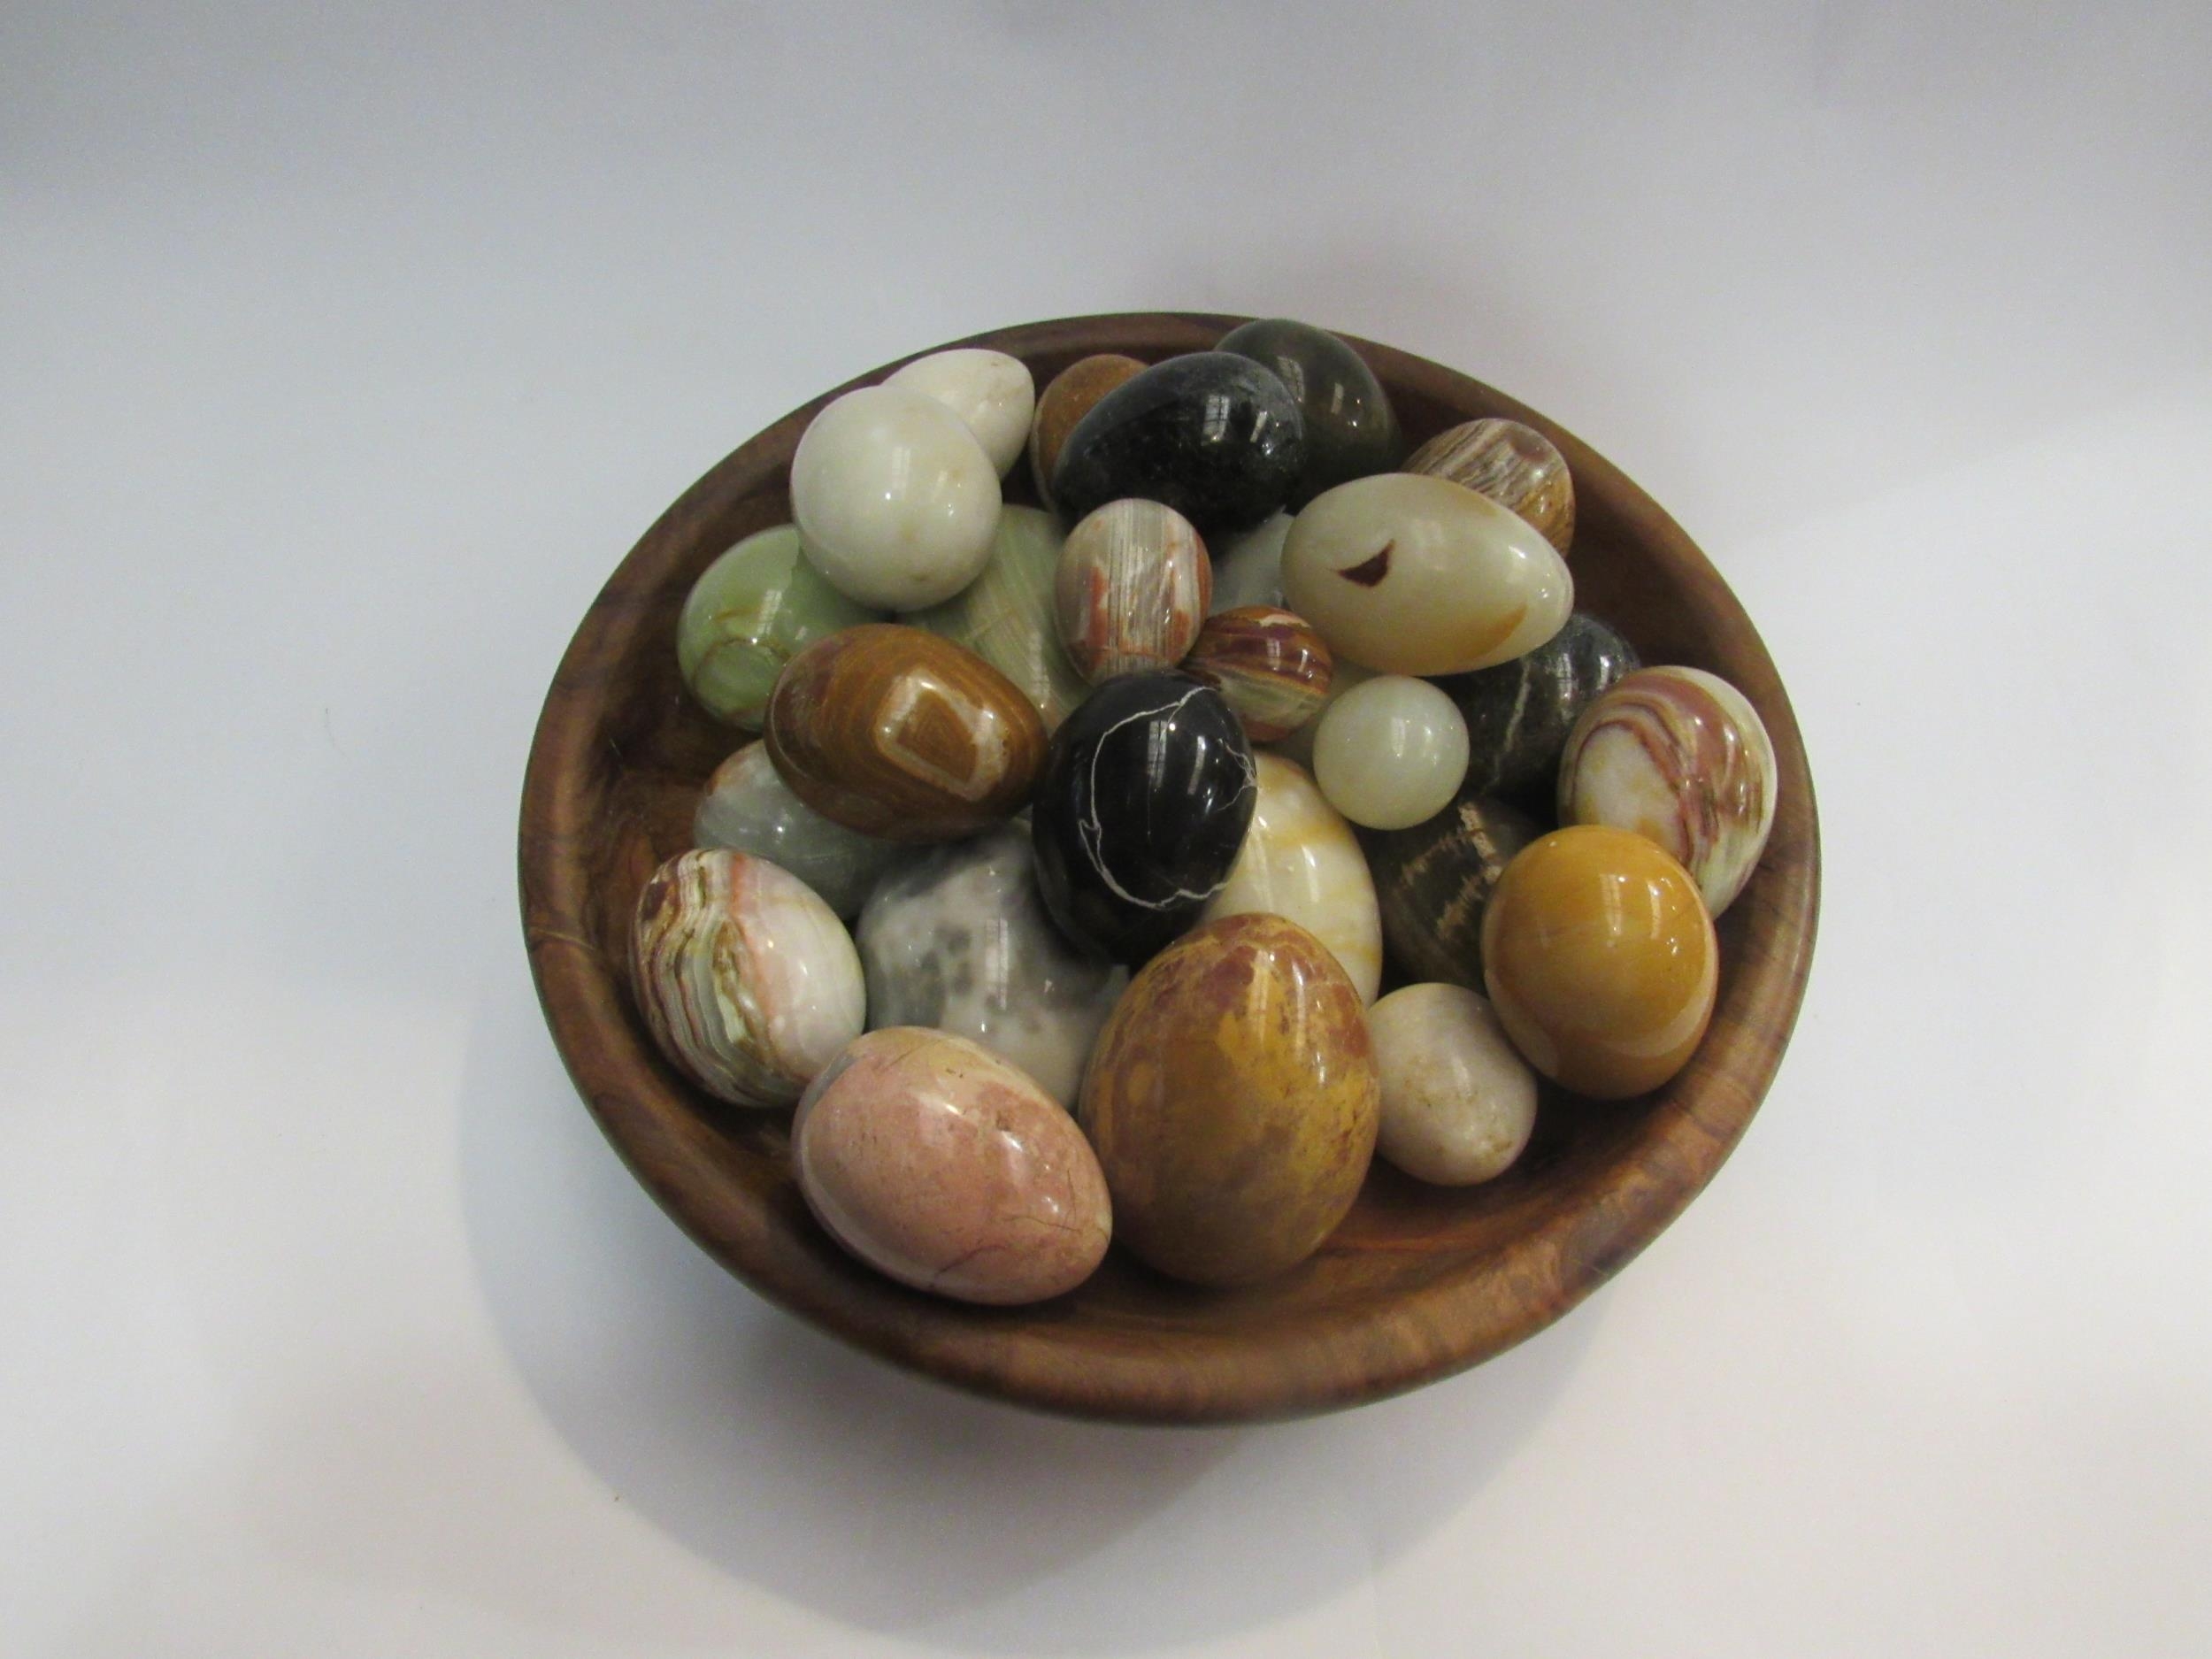 A wooden bowl containing a quantity of polished stone eggs